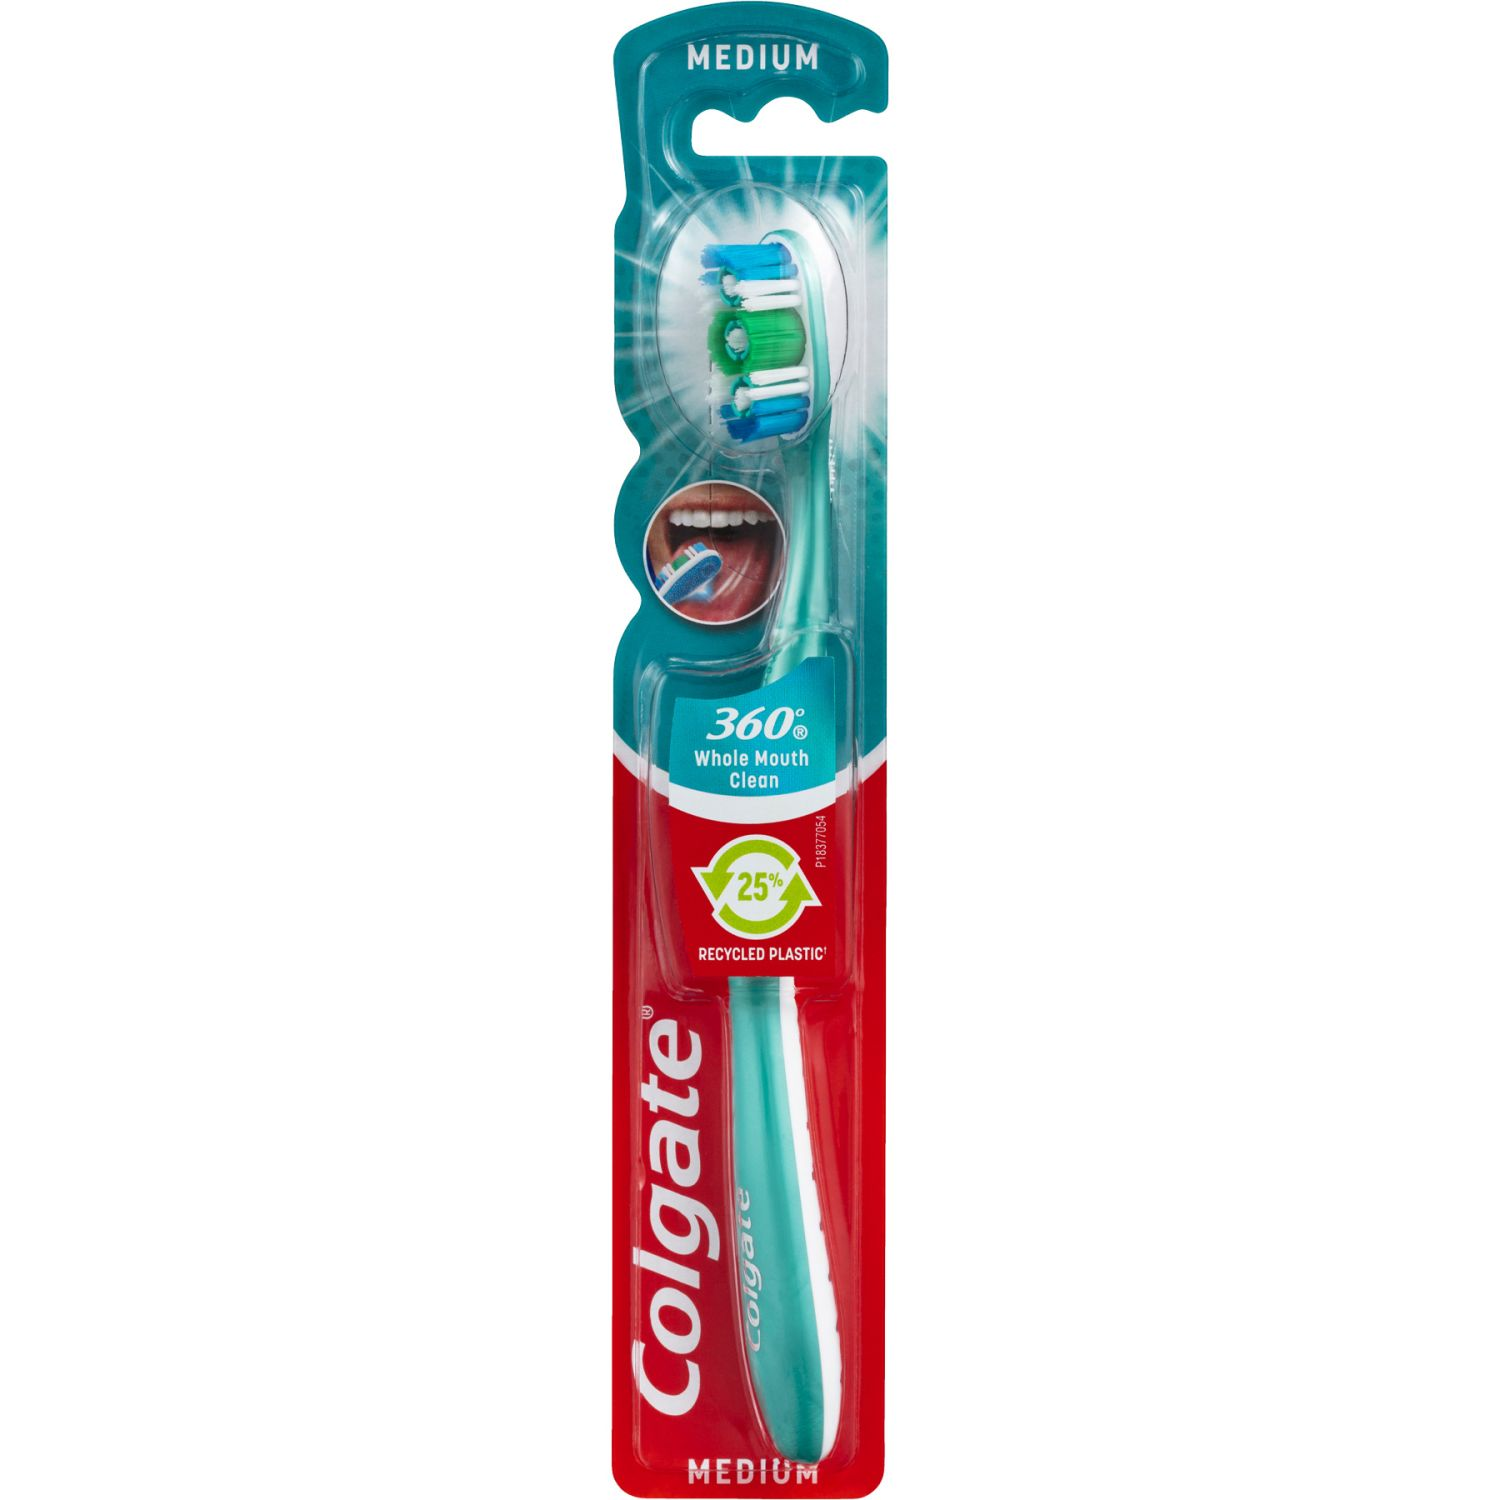 Colgate 360 Degrees Whole Mouth Clean Compact Head Toothbrush Medium, 1 Each